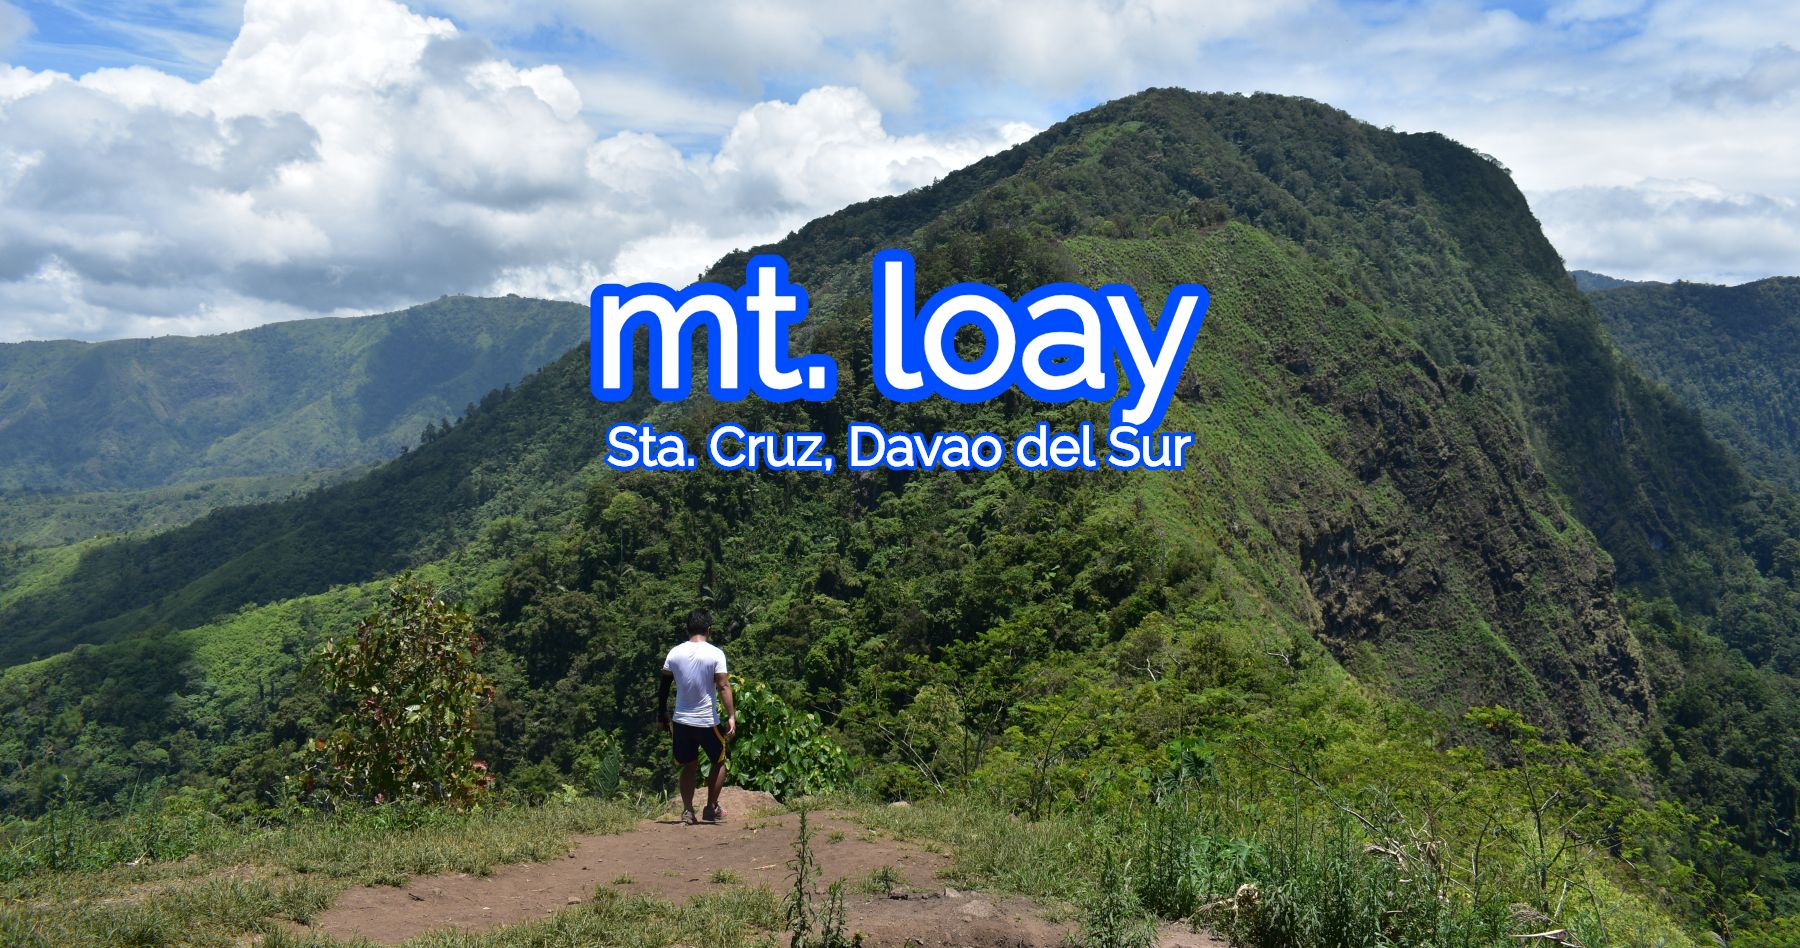 A Day Hike Guide To Mt. Loay (Traverse Langan Falls) – 11 Things To Know Prior To Your Adventure